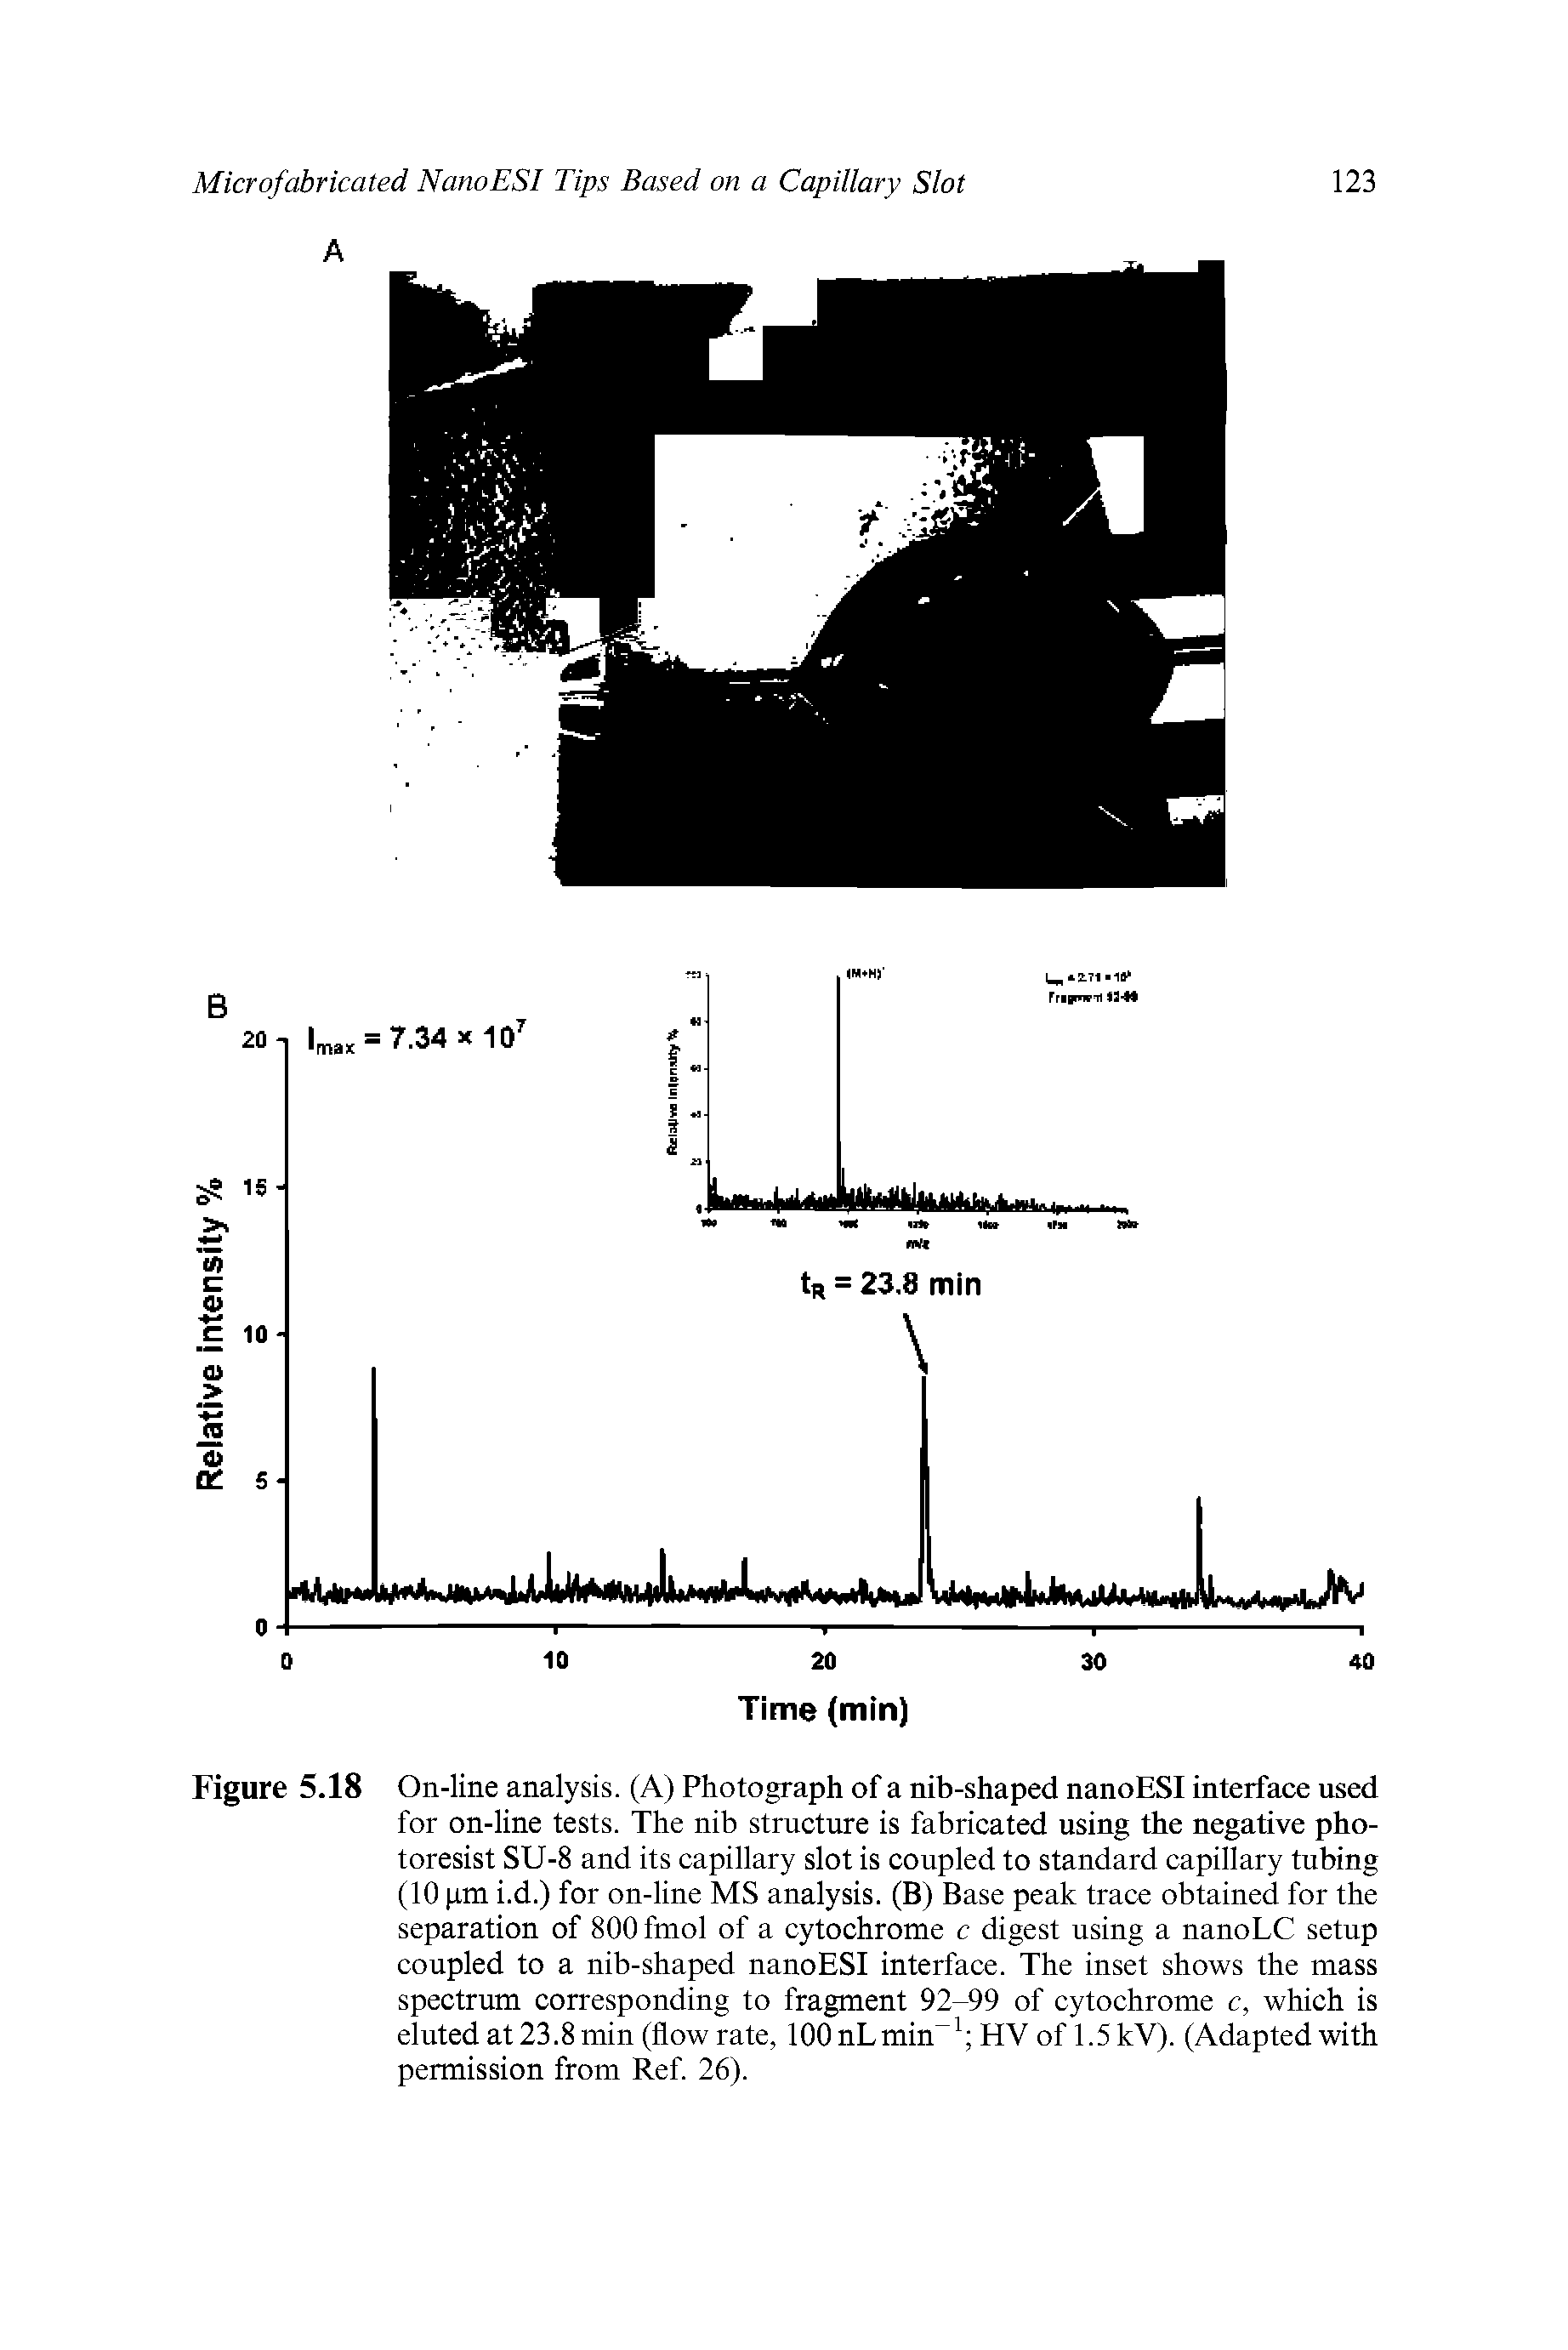 Figure 5.18 On-line analysis. (A) Photograph of a nib-shaped nanoESI interface used for on-line tests. The nib structure is fabricated using the negative photoresist SU-8 and its capillary slot is coupled to standard capillary tubing (10 pm i.d.) for on-line MS analysis. (B) Base peak trace obtained for the separation of 800 fmol of a cytochrome c digest using a nanoLC setup coupled to a nib-shaped nanoESI interface. The inset shows the mass spectrum corresponding to fragment 92-99 of cytochrome c, which is eluted at 23.8 min (flow rate, 100 nLmin-1 HY of 1.5 kV). (Adapted with permission from Ref. 26).